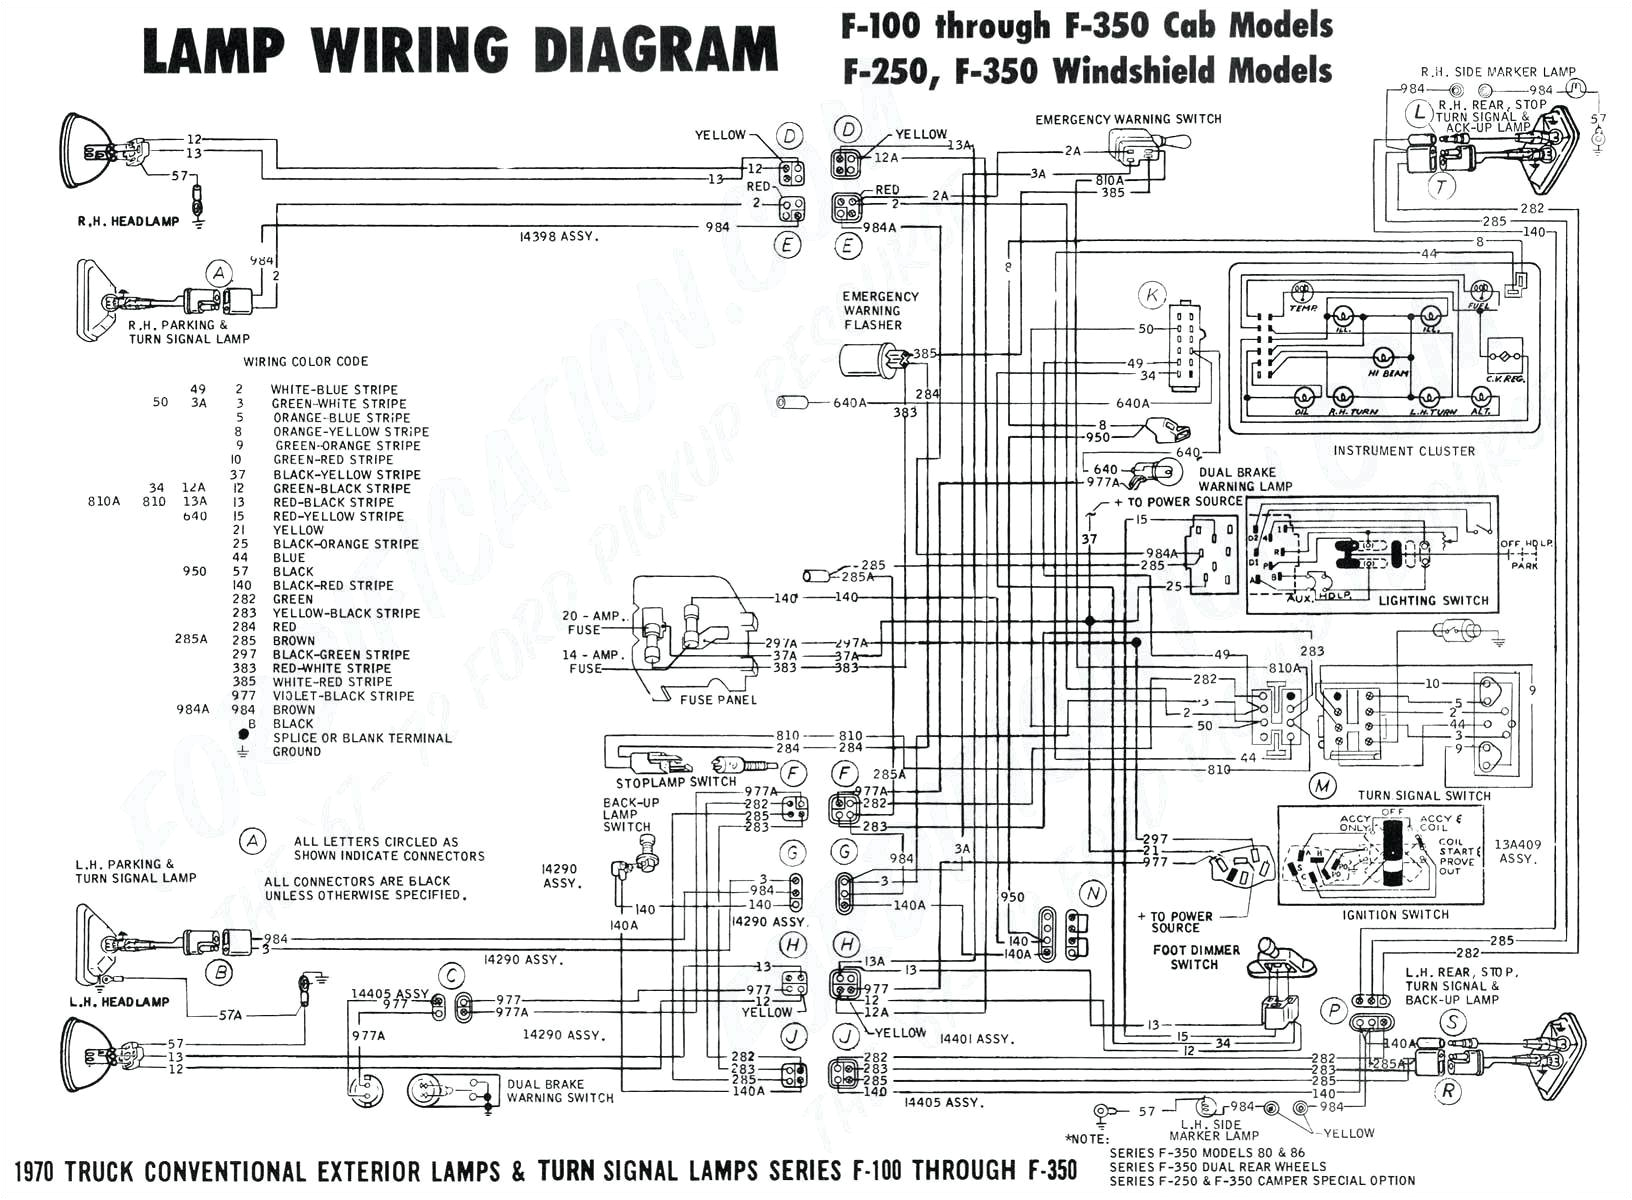 1931 ford engine diagram wiring diagram img1930 ford model a pick up wiring diagram wiring diagram